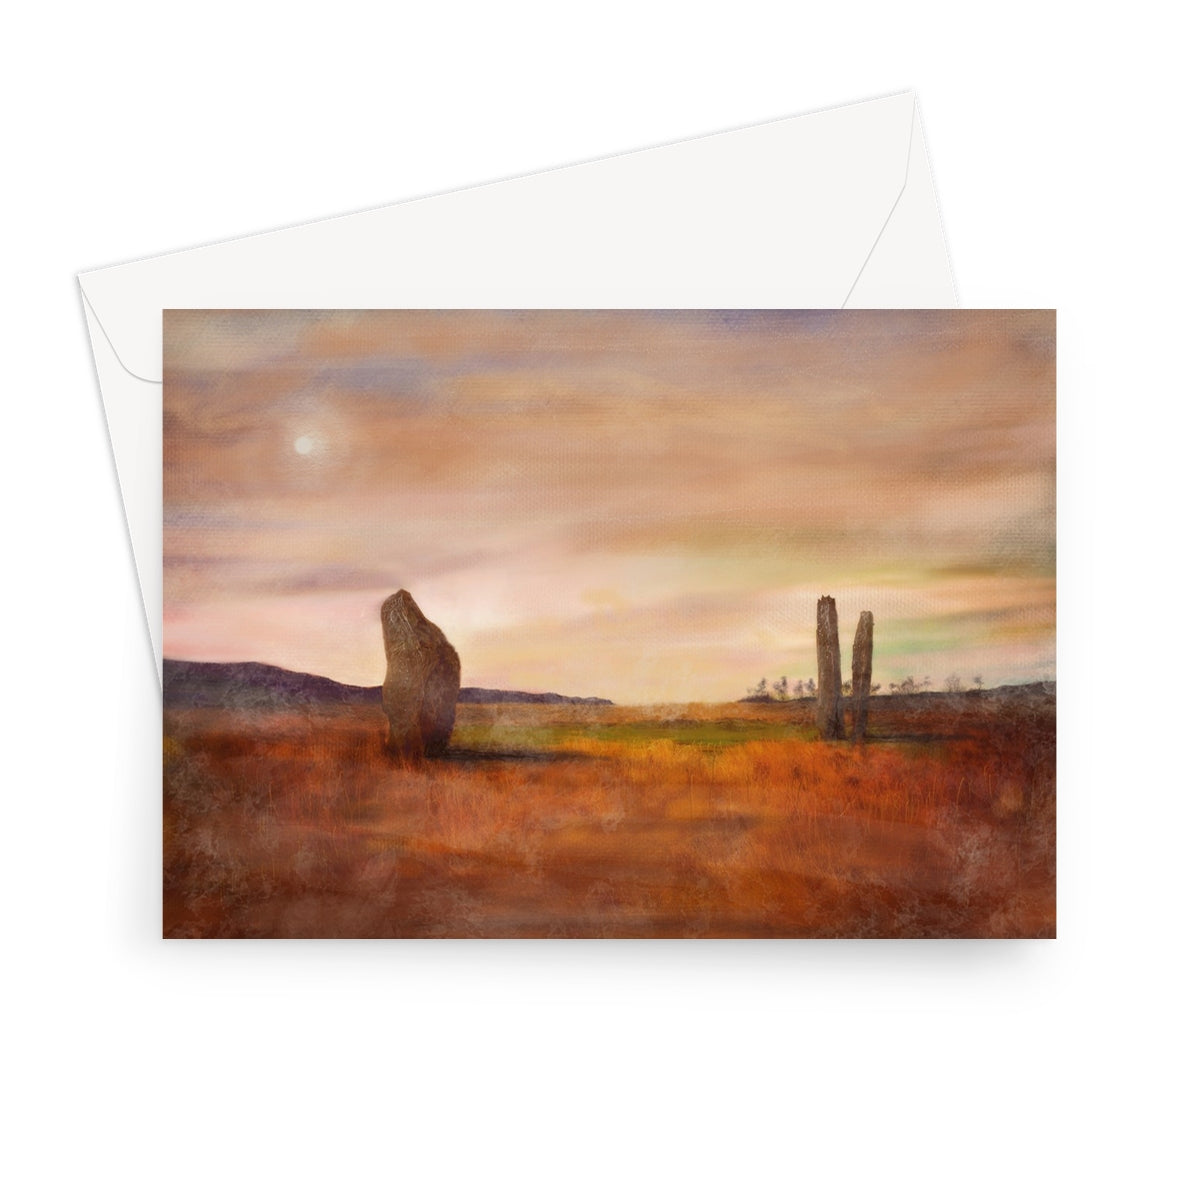 Machrie Moor Arran Art Gifts Greeting Card-Greetings Cards-Arran Art Gallery-7"x5"-1 Card-Paintings, Prints, Homeware, Art Gifts From Scotland By Scottish Artist Kevin Hunter